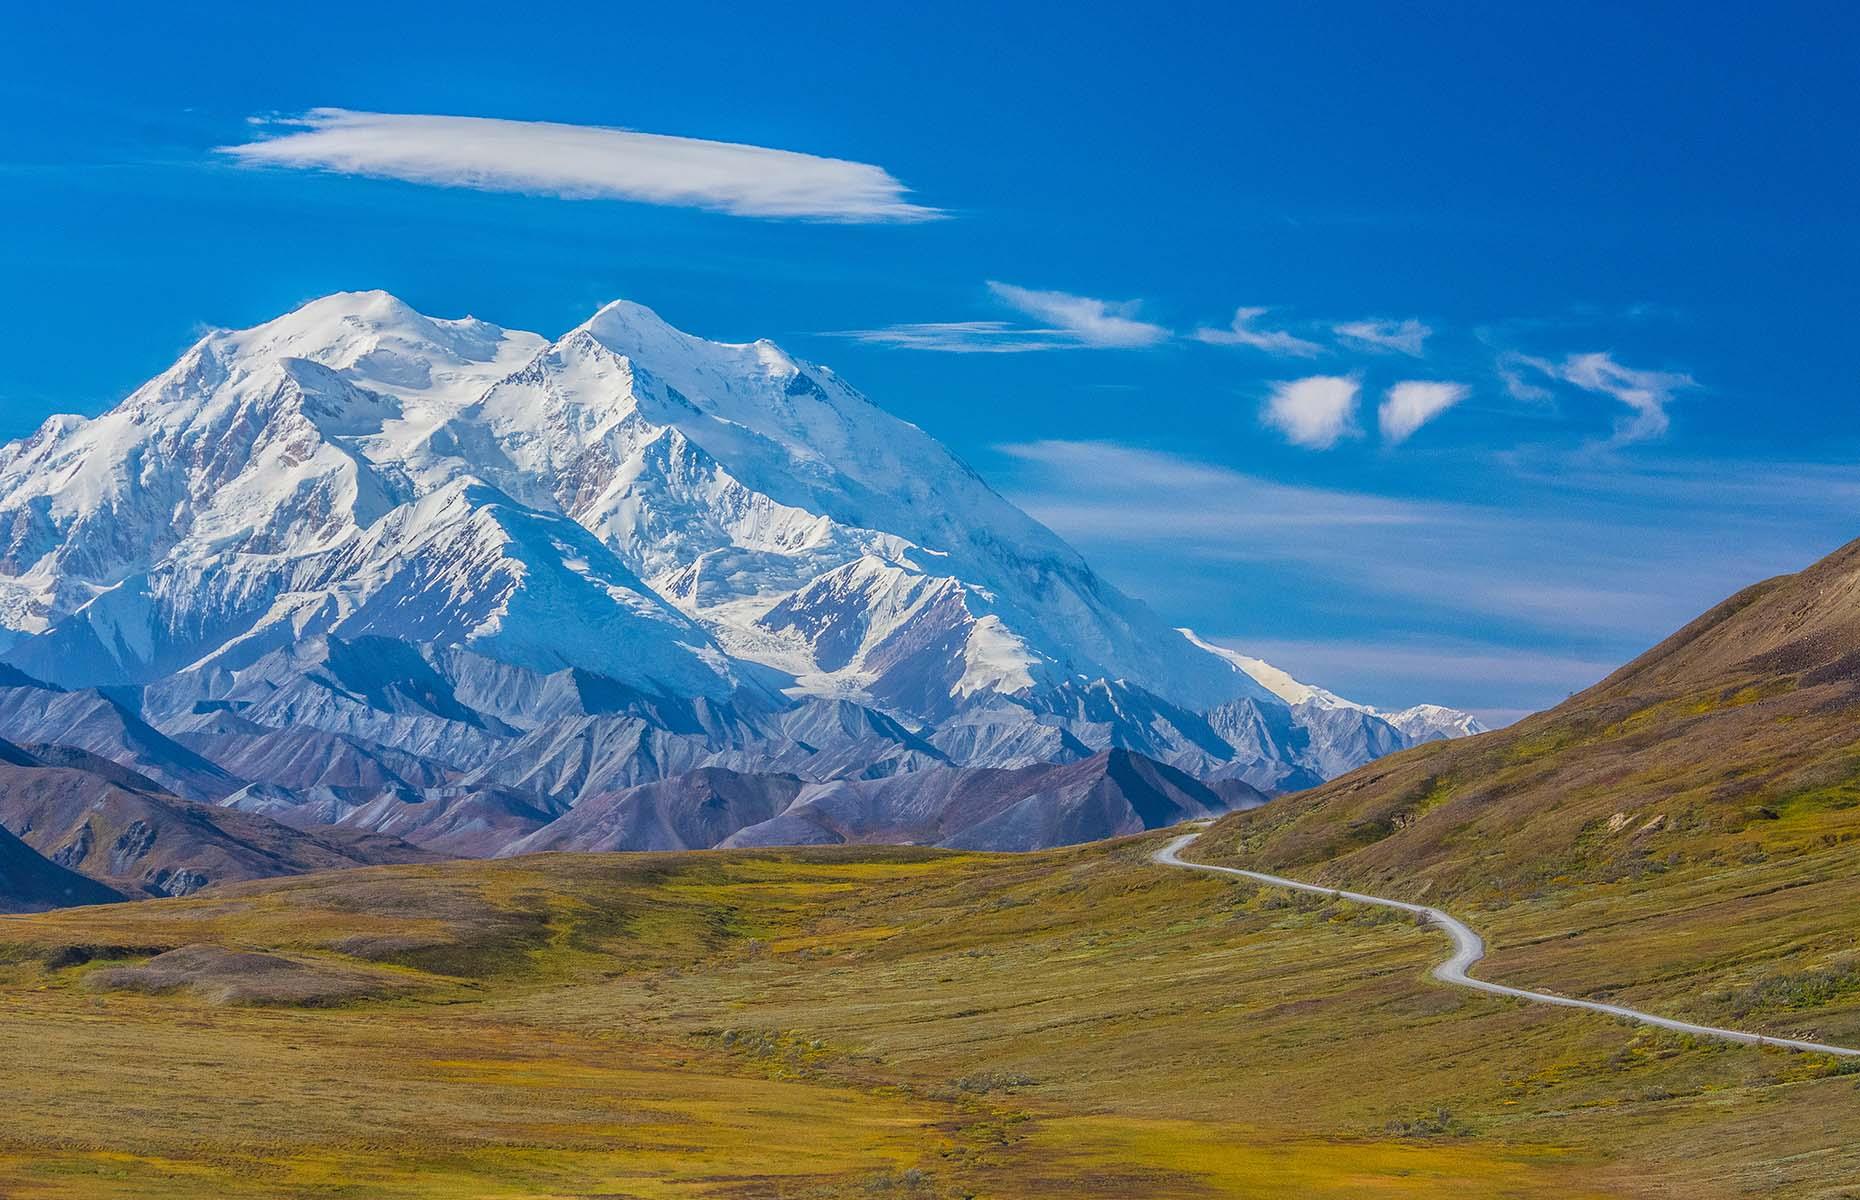 <p>High on many travellers' wish lists, Mount Denali is North America’s tallest peak, rising a dizzying 20,310 feet (6,190m) above sea level. Located in south-central Alaska, the native Koyukon Athabascan people named it Denali, which translates as The Great One. However, in 1896, a gold prospector decided to name the mountain after then-presidential nominee William McKinley, spurring a naming dispute which lasted more than a century. After a 40-year stint of officially being called Mount McKinley, the name was changed back to Denali in 2015.</p>